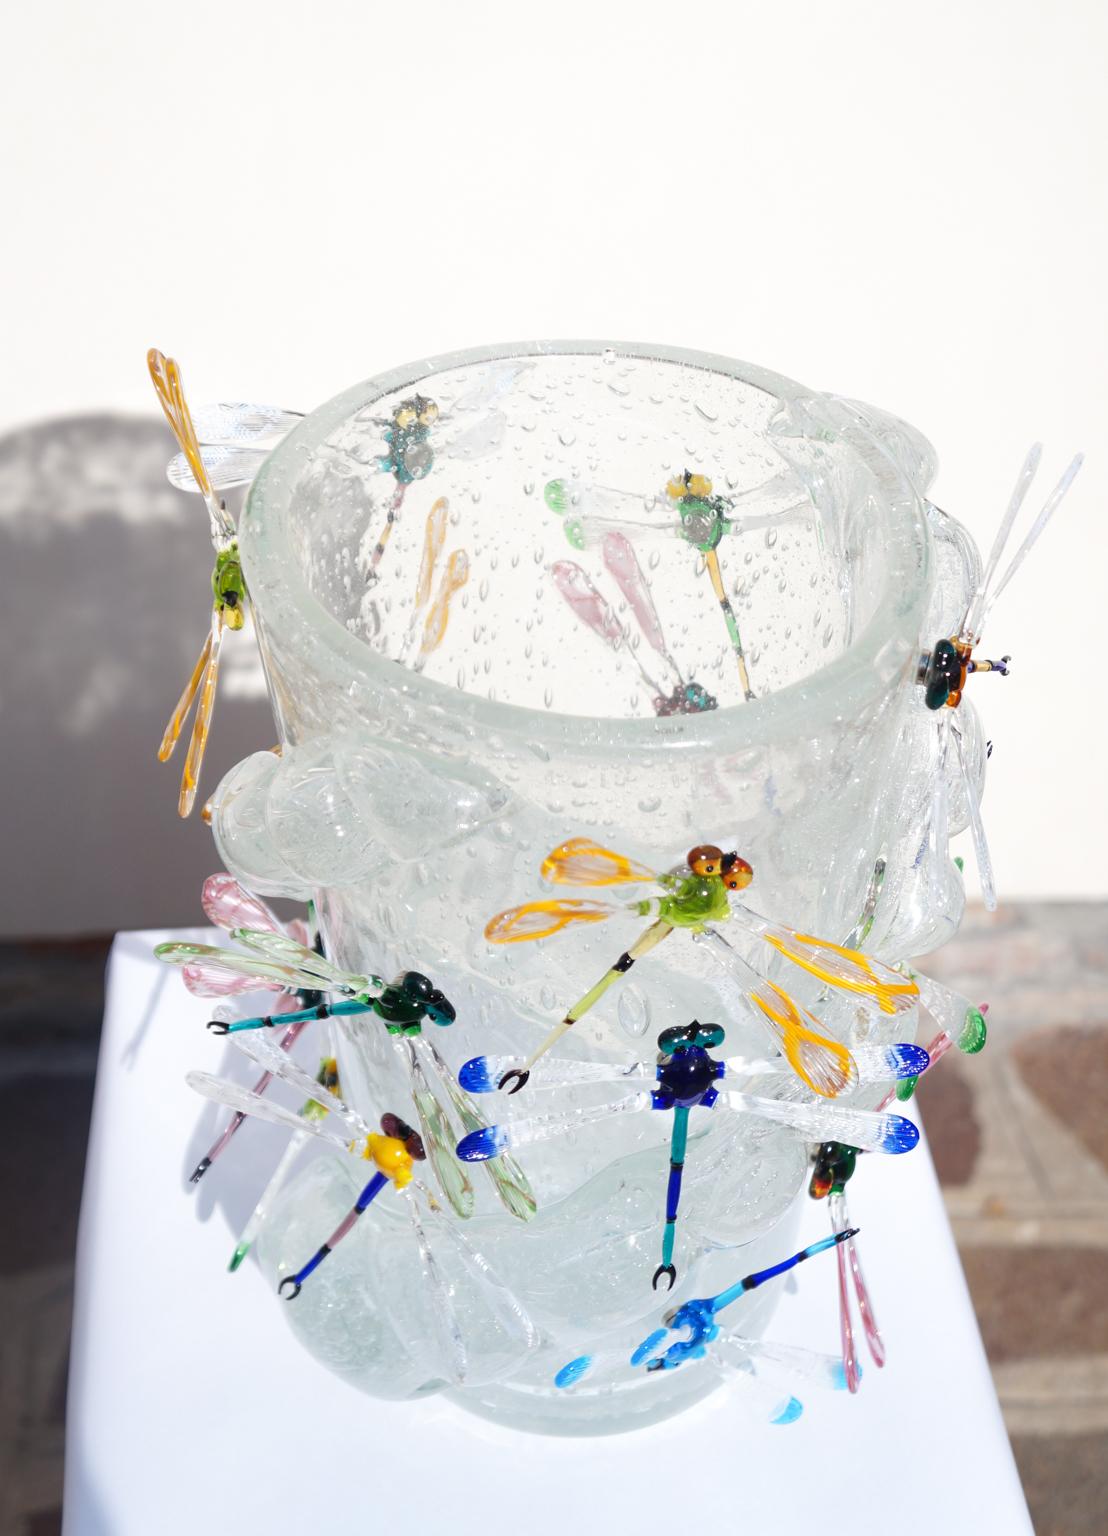 Costantini Diego Modern Crystal Pulegoso Made Murano Glass Vase with Dragonflies For Sale 5